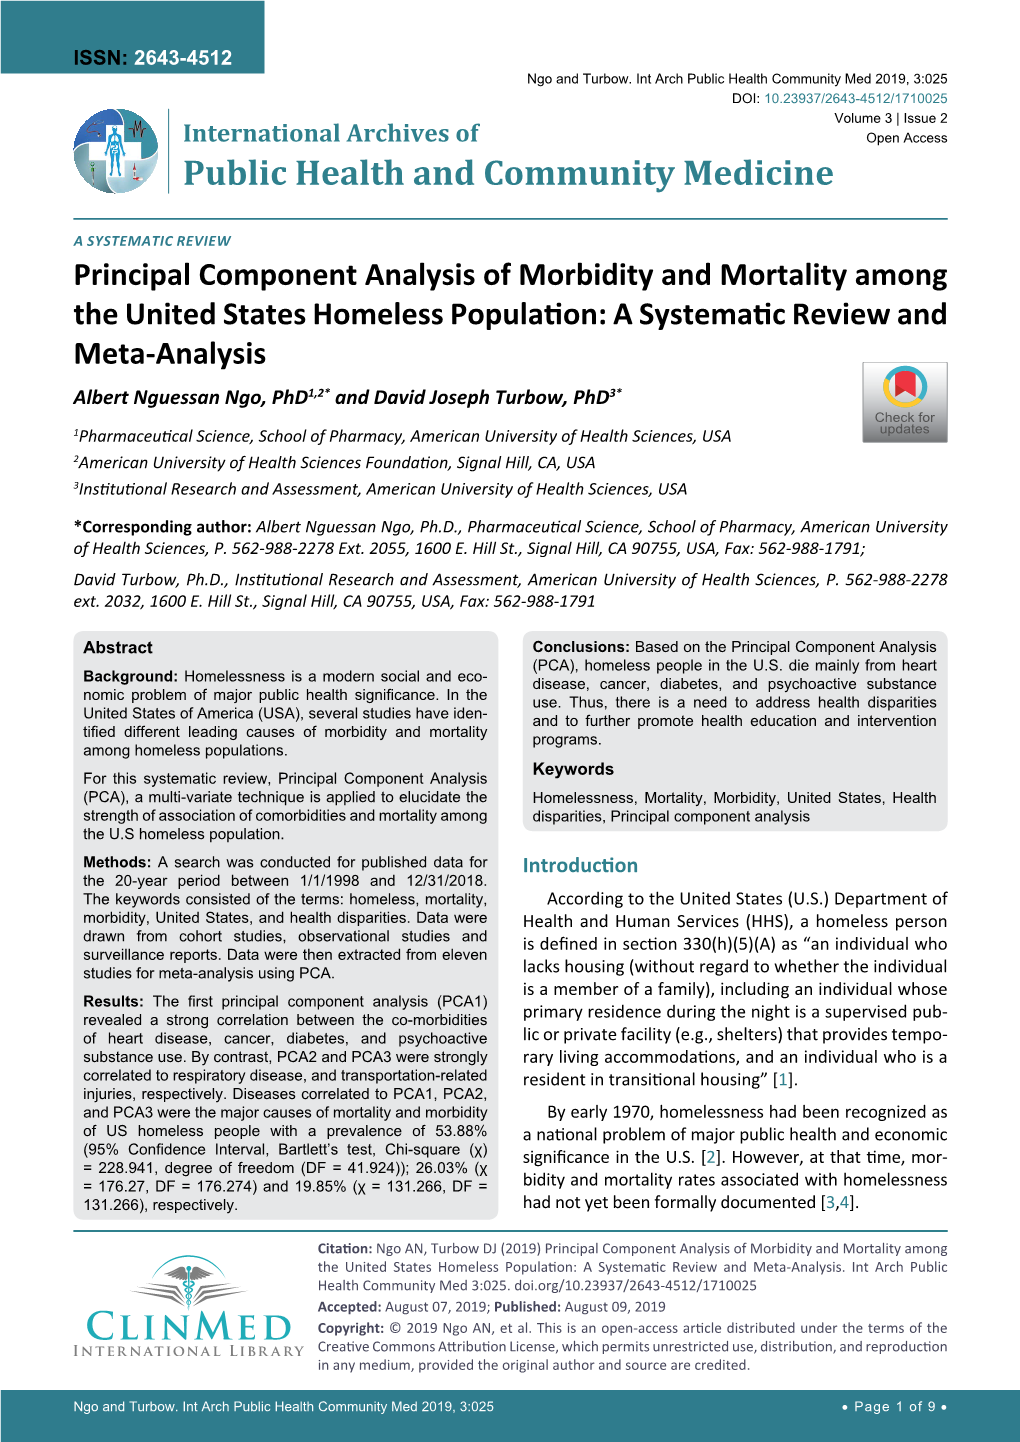 Component Analysis of Morbidity and Mortality Amongthe United States